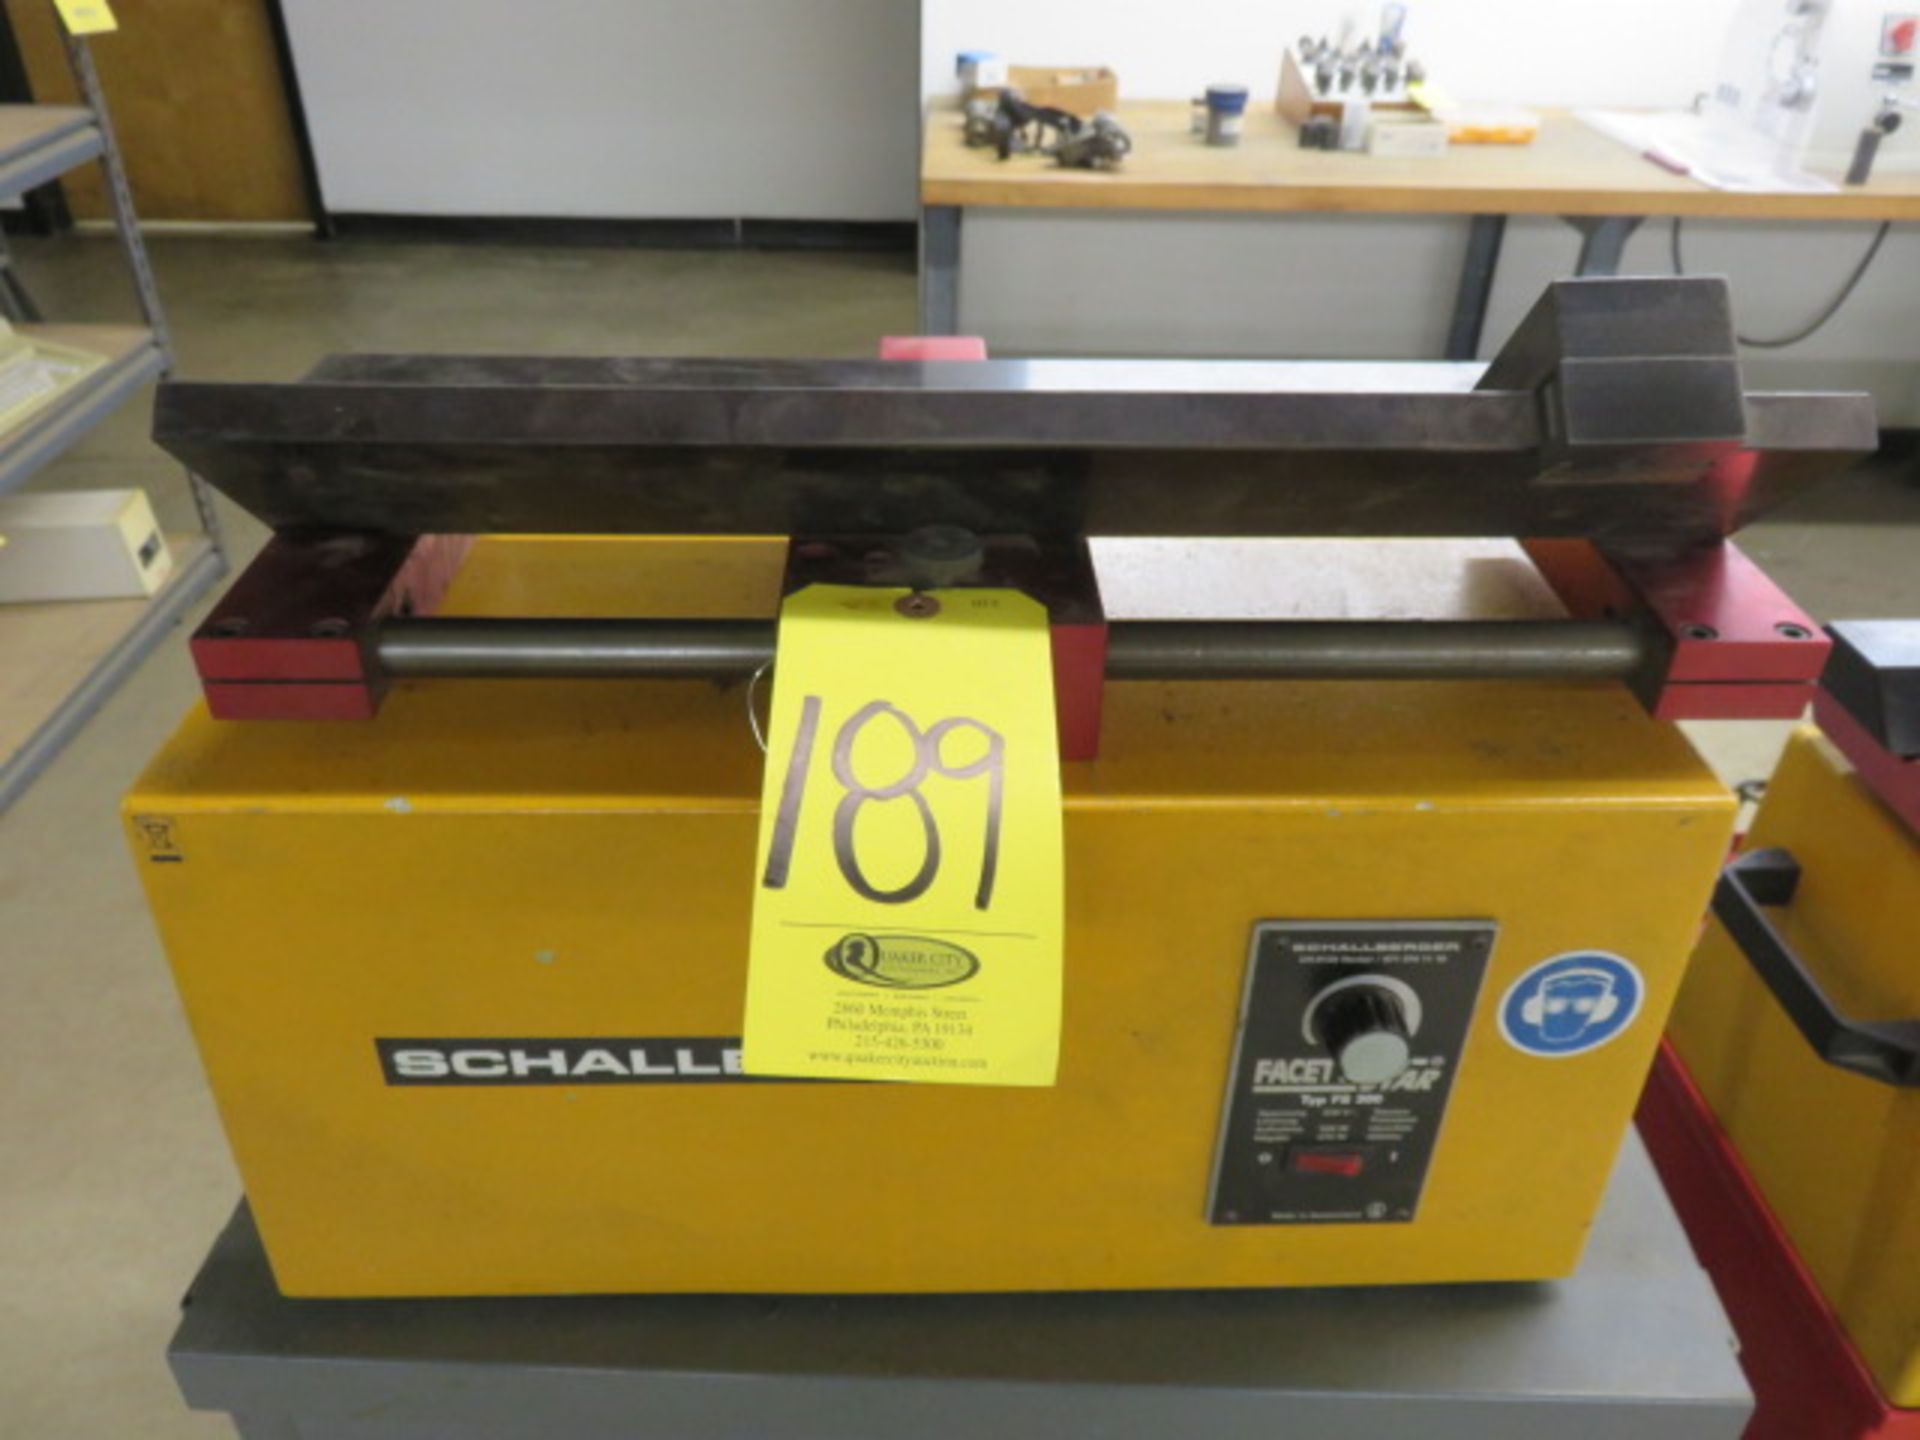 SCHALLBERGER FACETTE STAR FS300 CHAMFERING AND DEBURRING MACHINE (NEEDS REPAIR) - Image 2 of 3